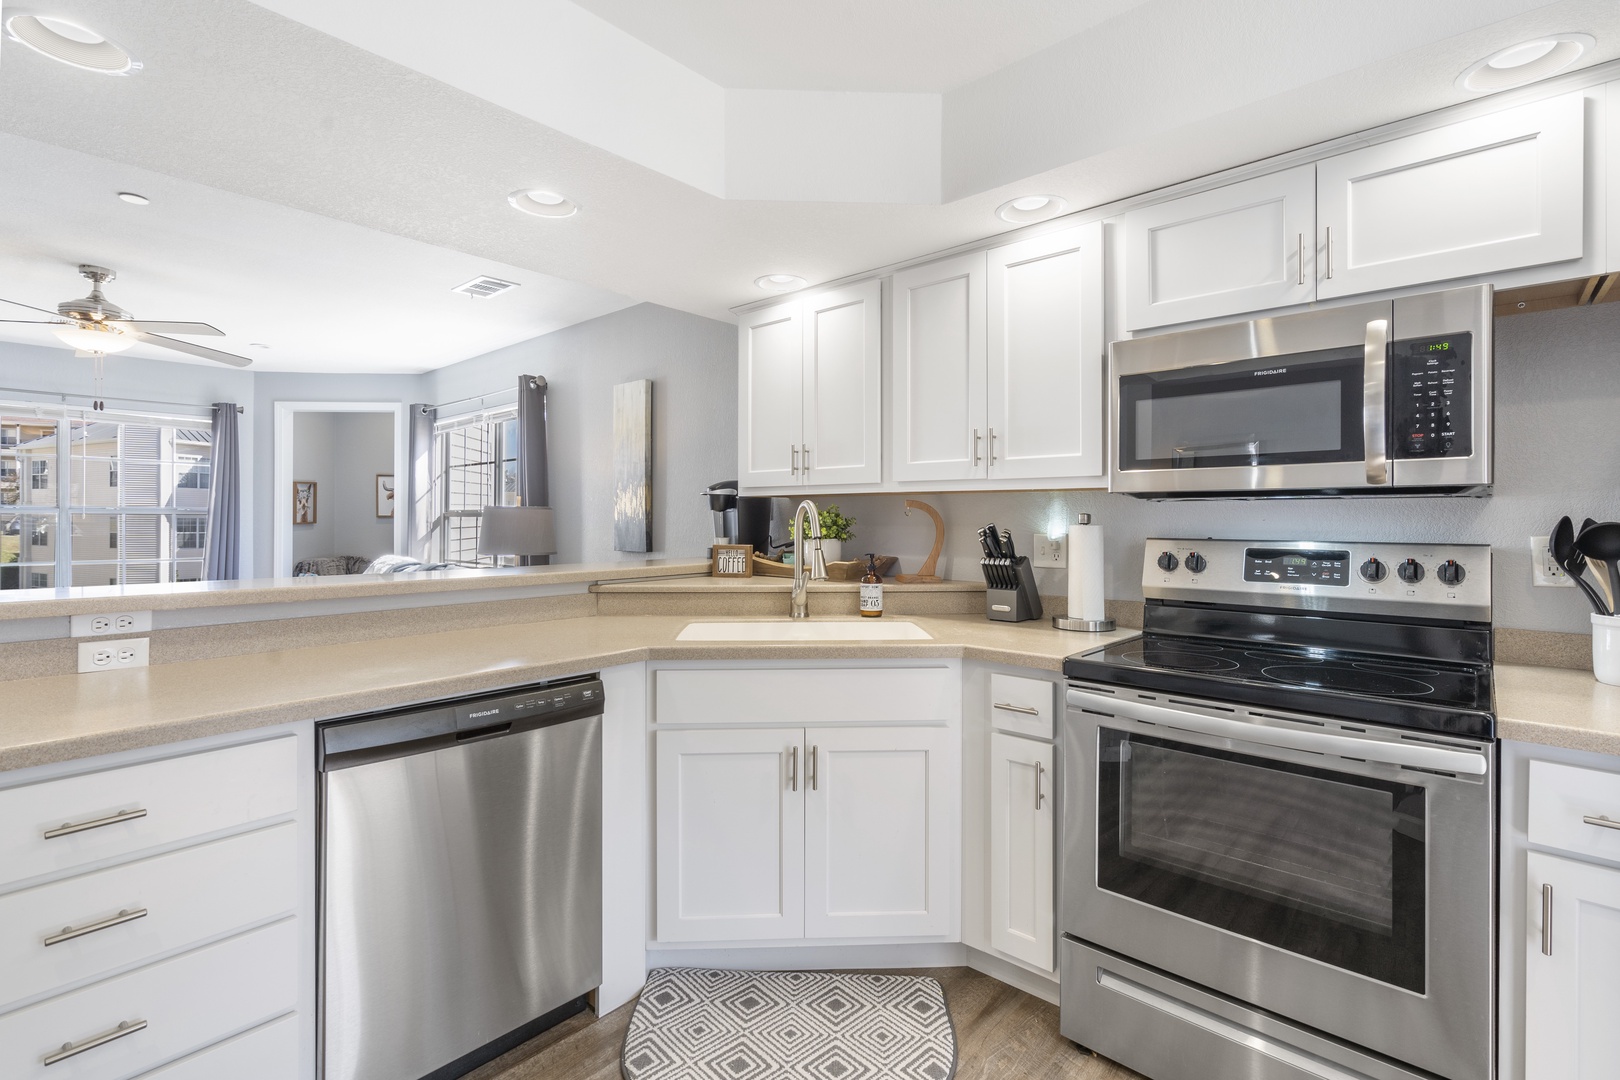 Dishwasher, electric stove, and more in the kitchen!